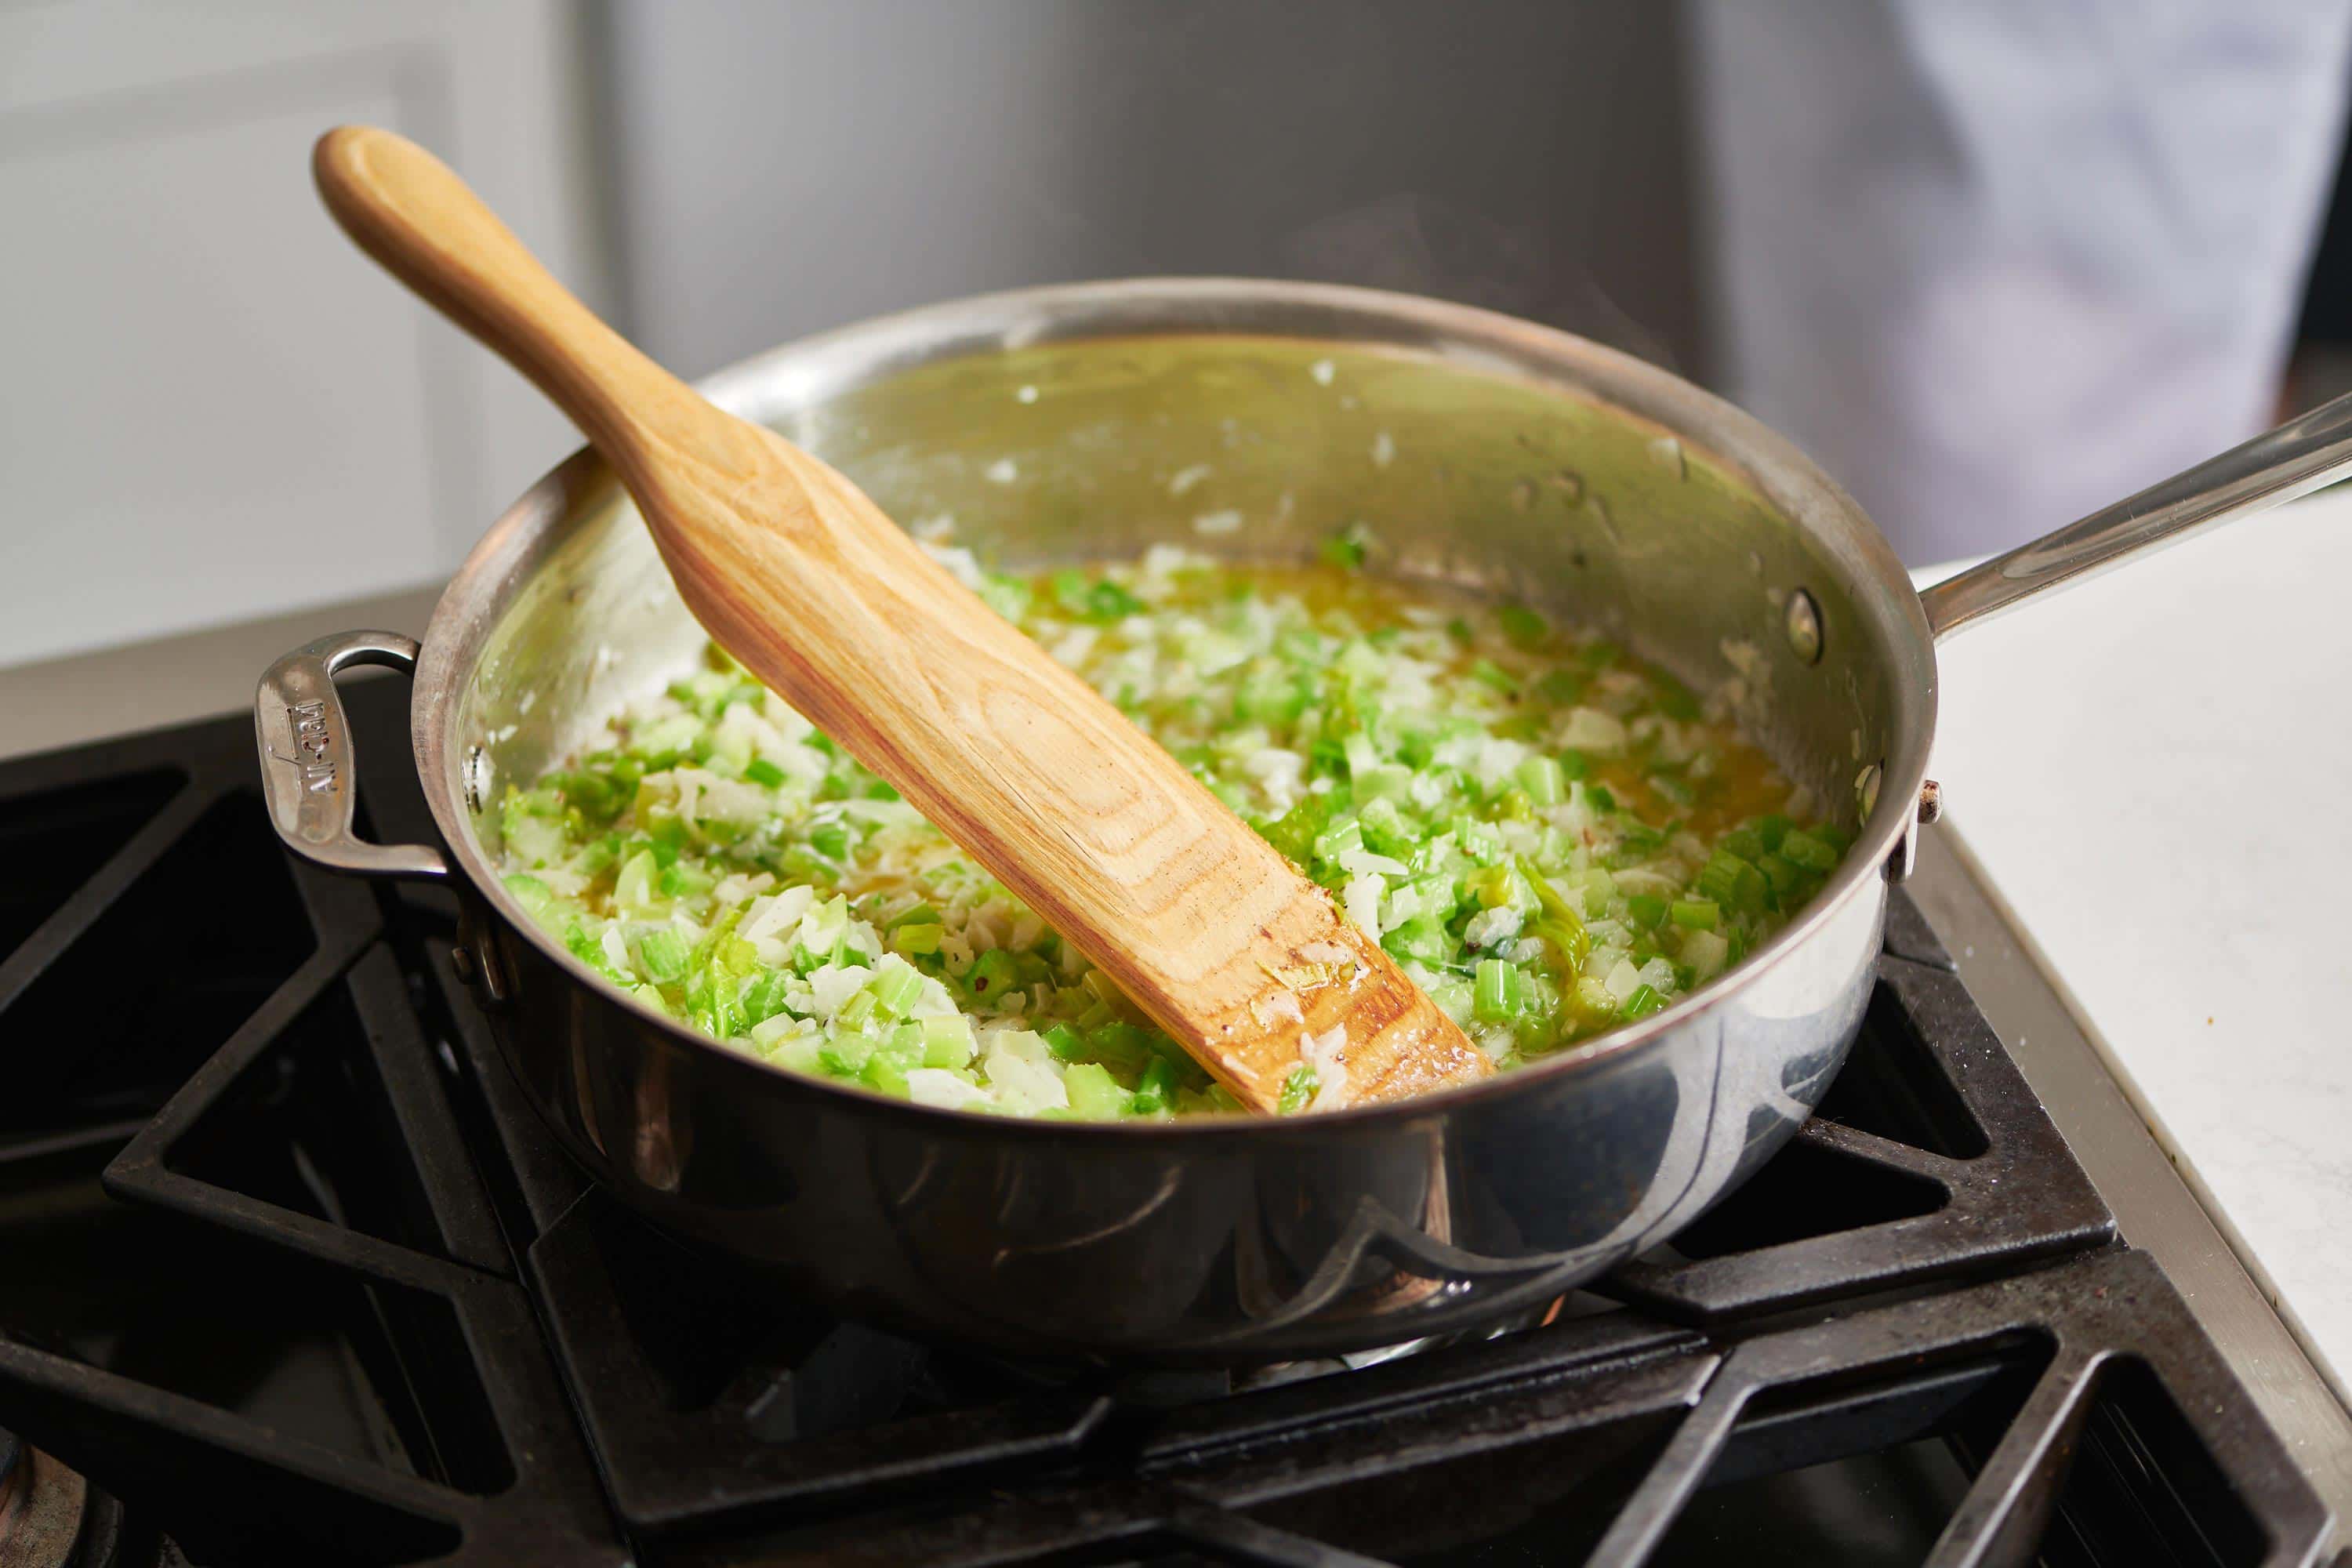 Wooden spatula in a skillet with onions and celery.